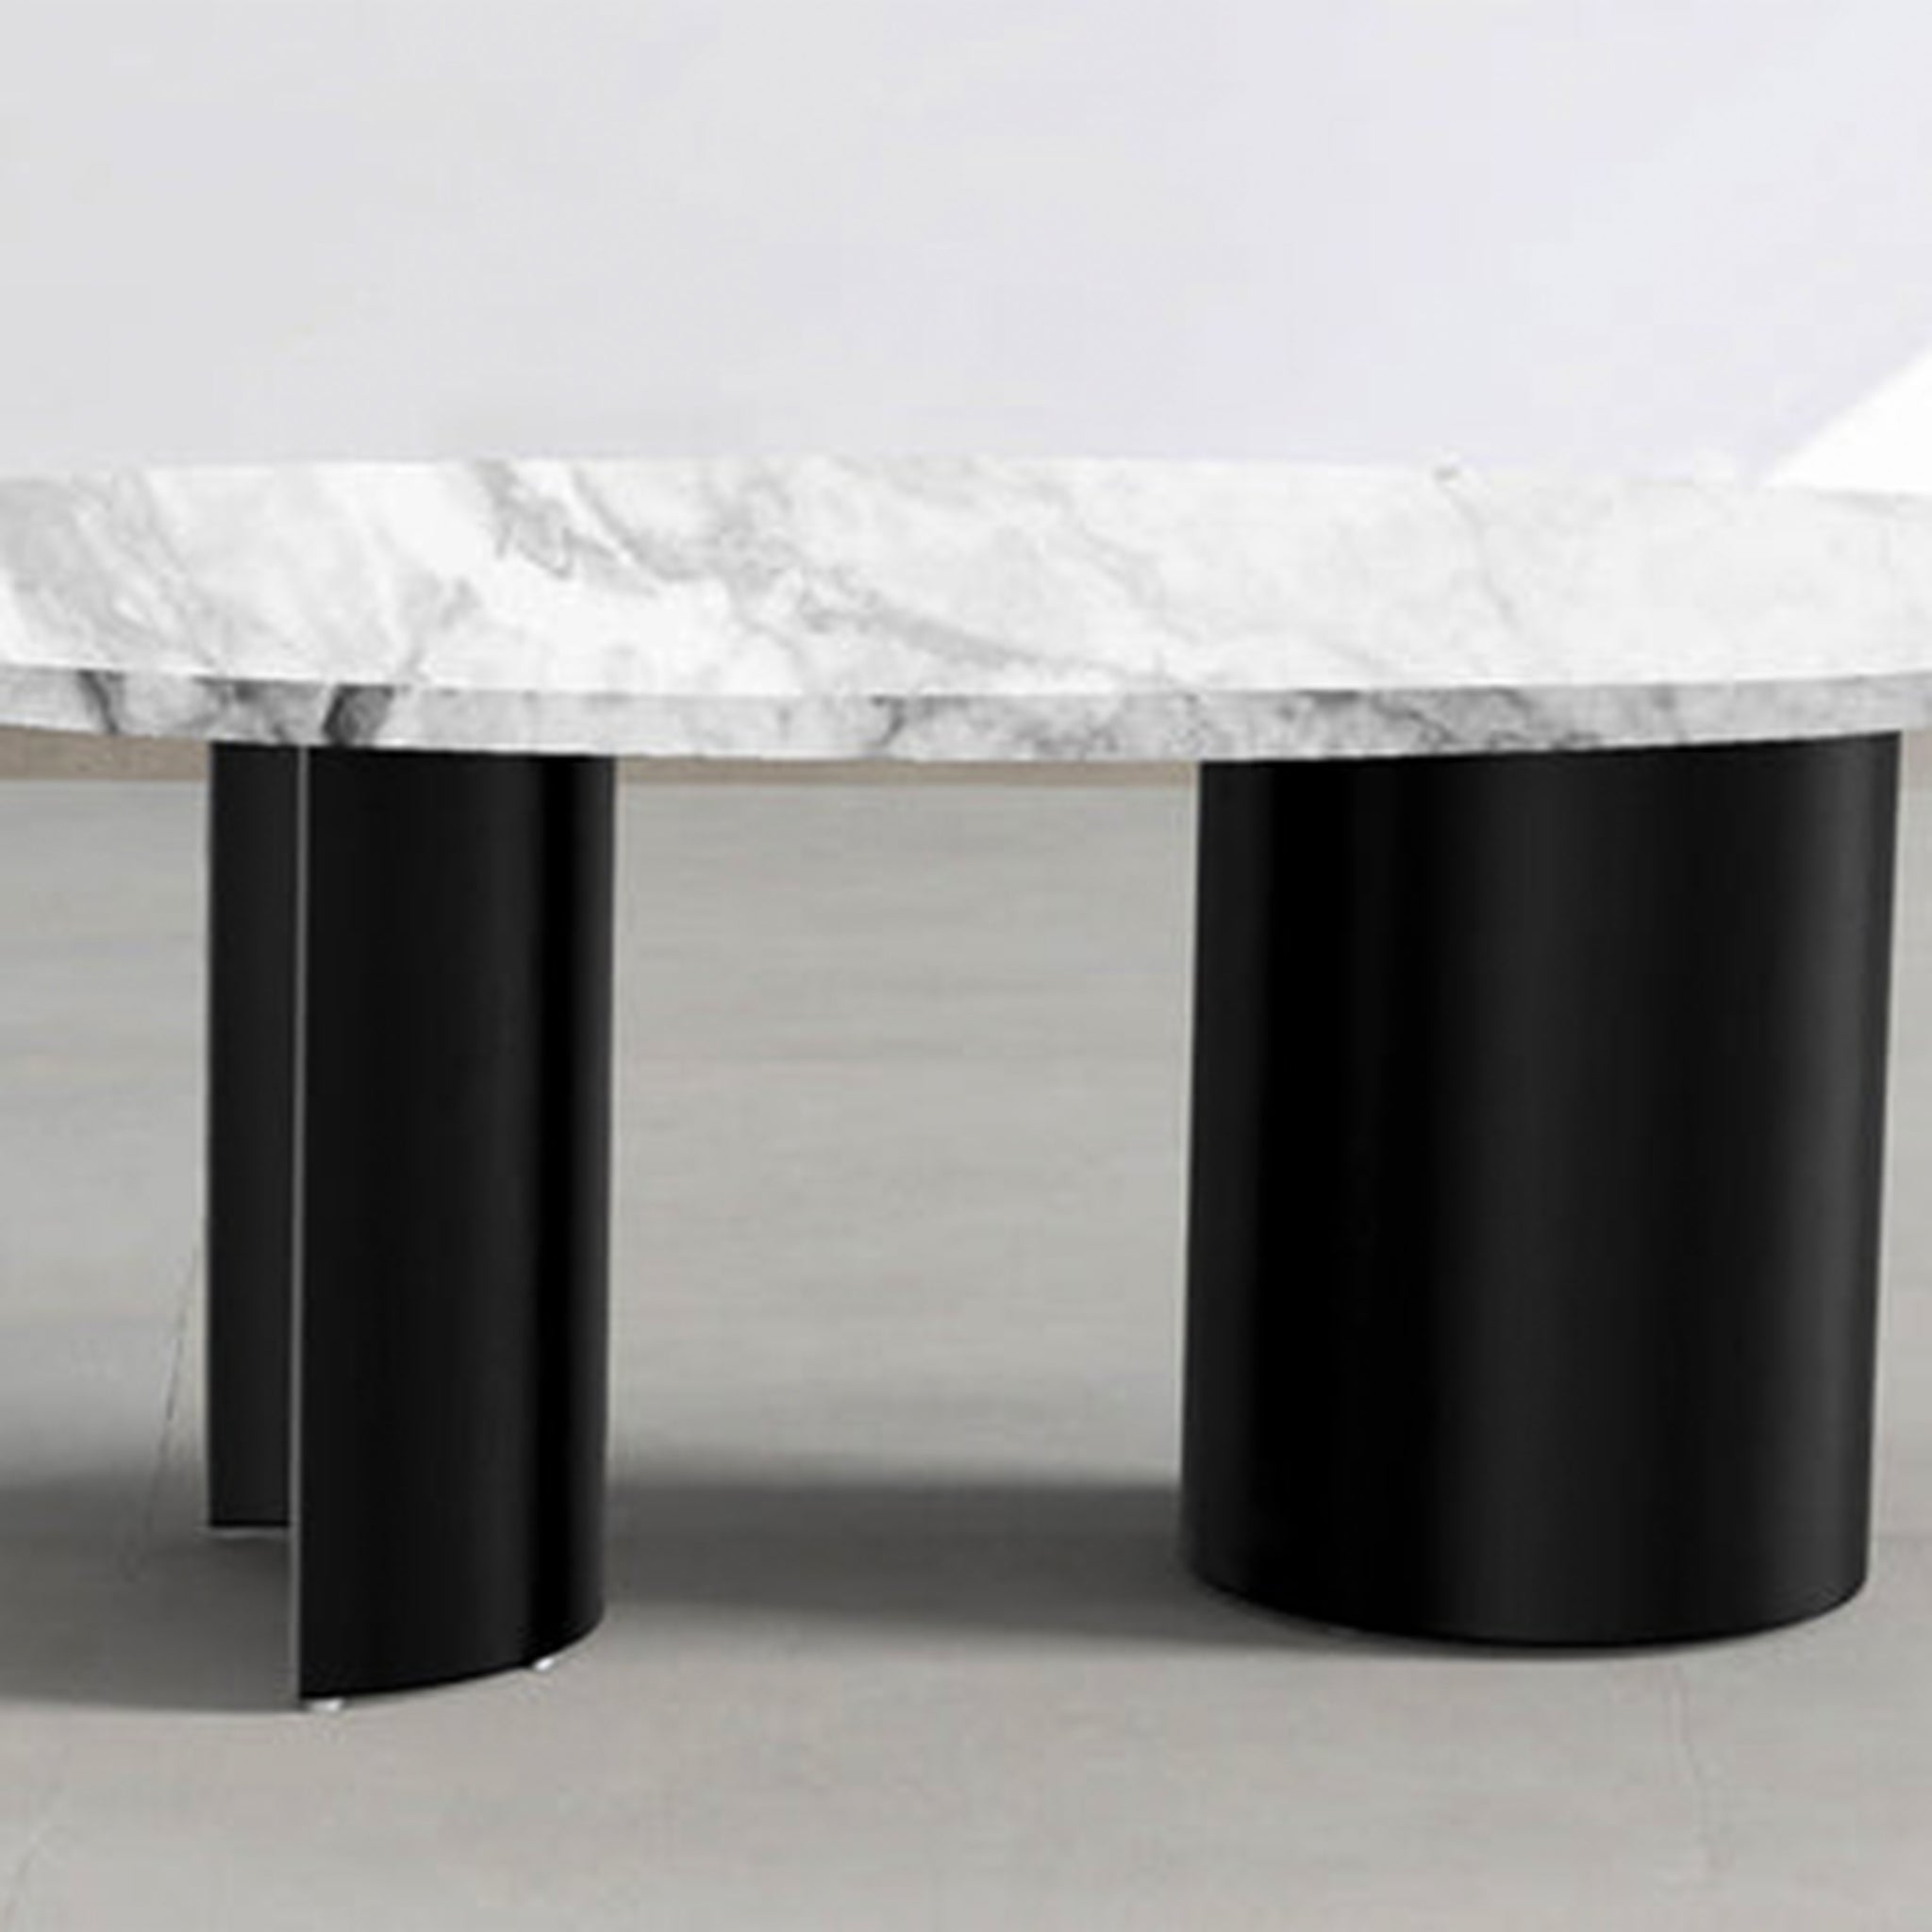 Nesting Coffee Table: Pair it with another table for a modern, space-saving look